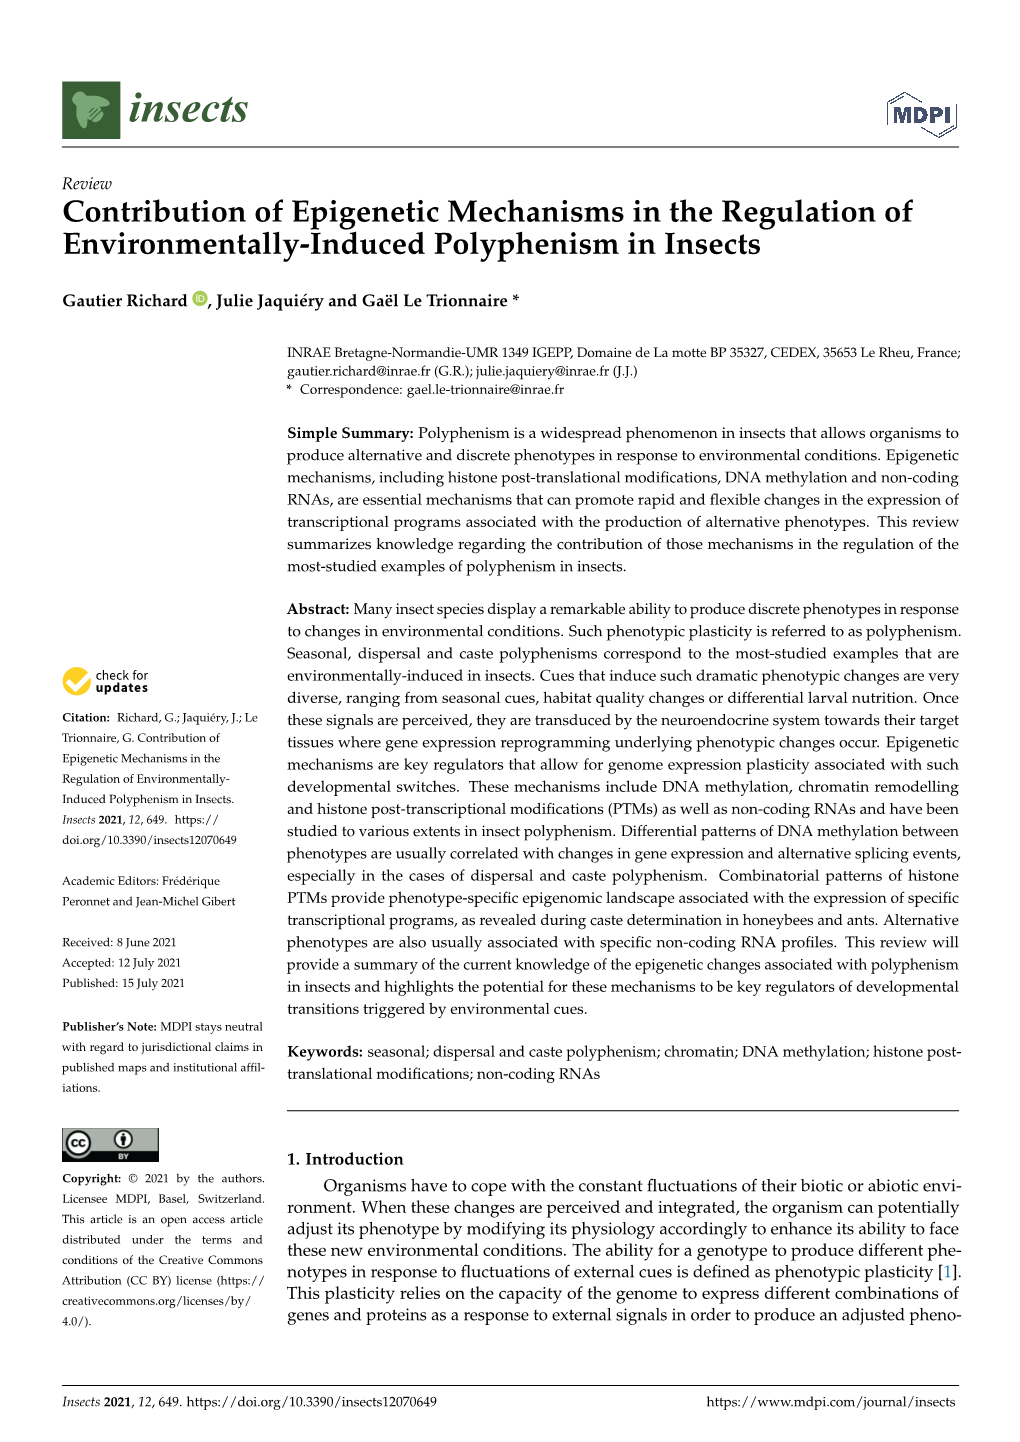 Contribution of Epigenetic Mechanisms in the Regulation of Environmentally-Induced Polyphenism in Insects